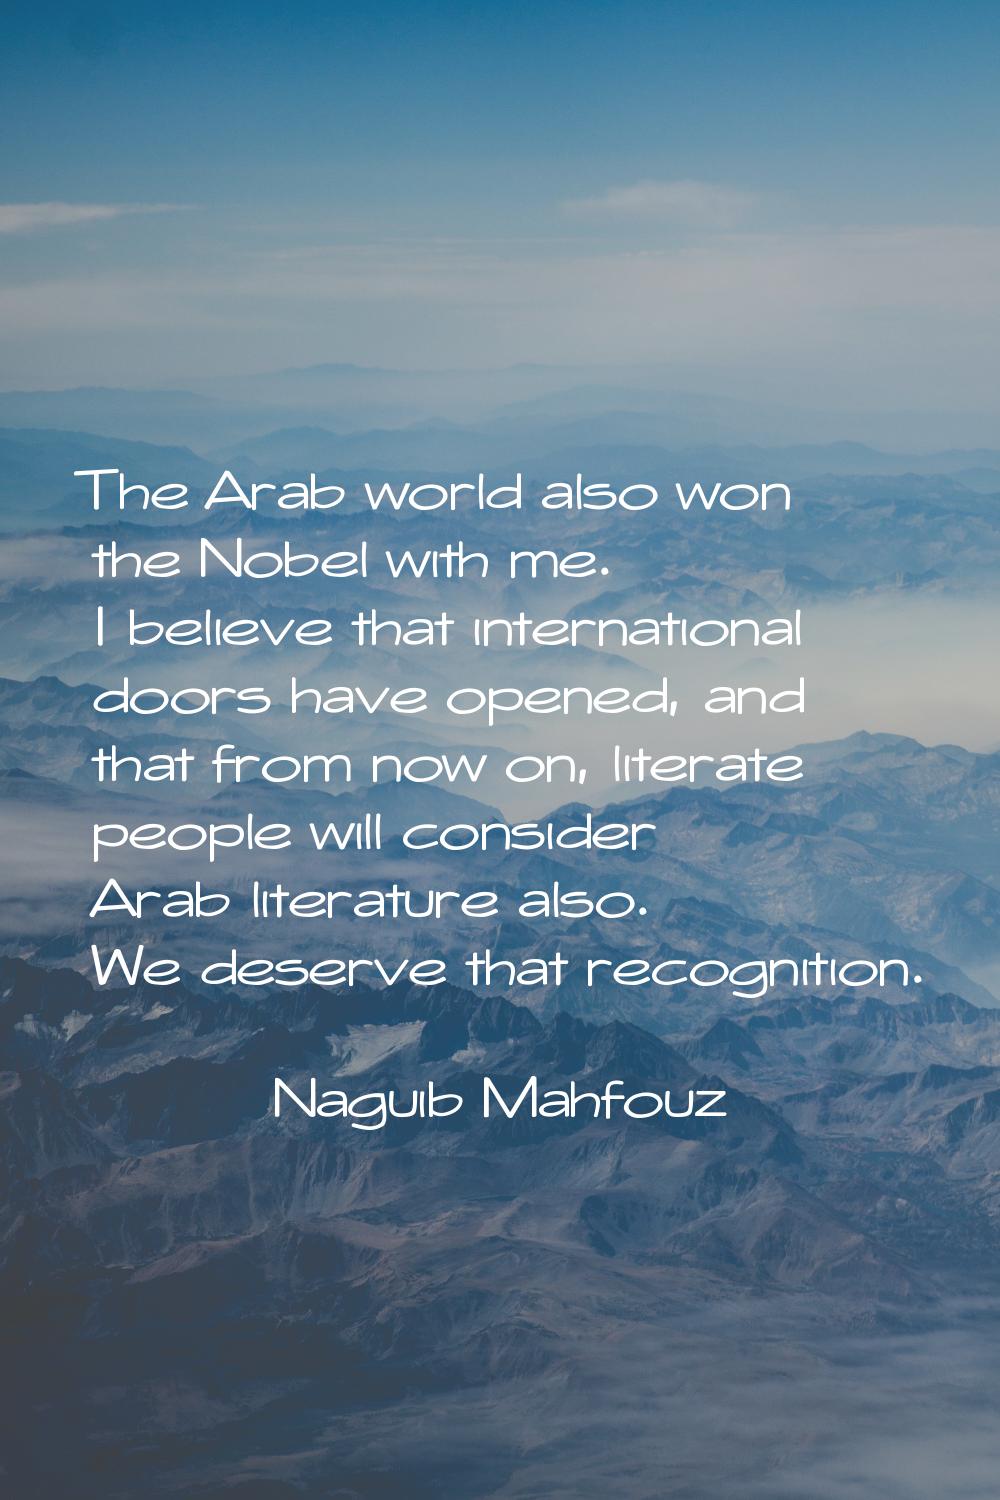 The Arab world also won the Nobel with me. I believe that international doors have opened, and that